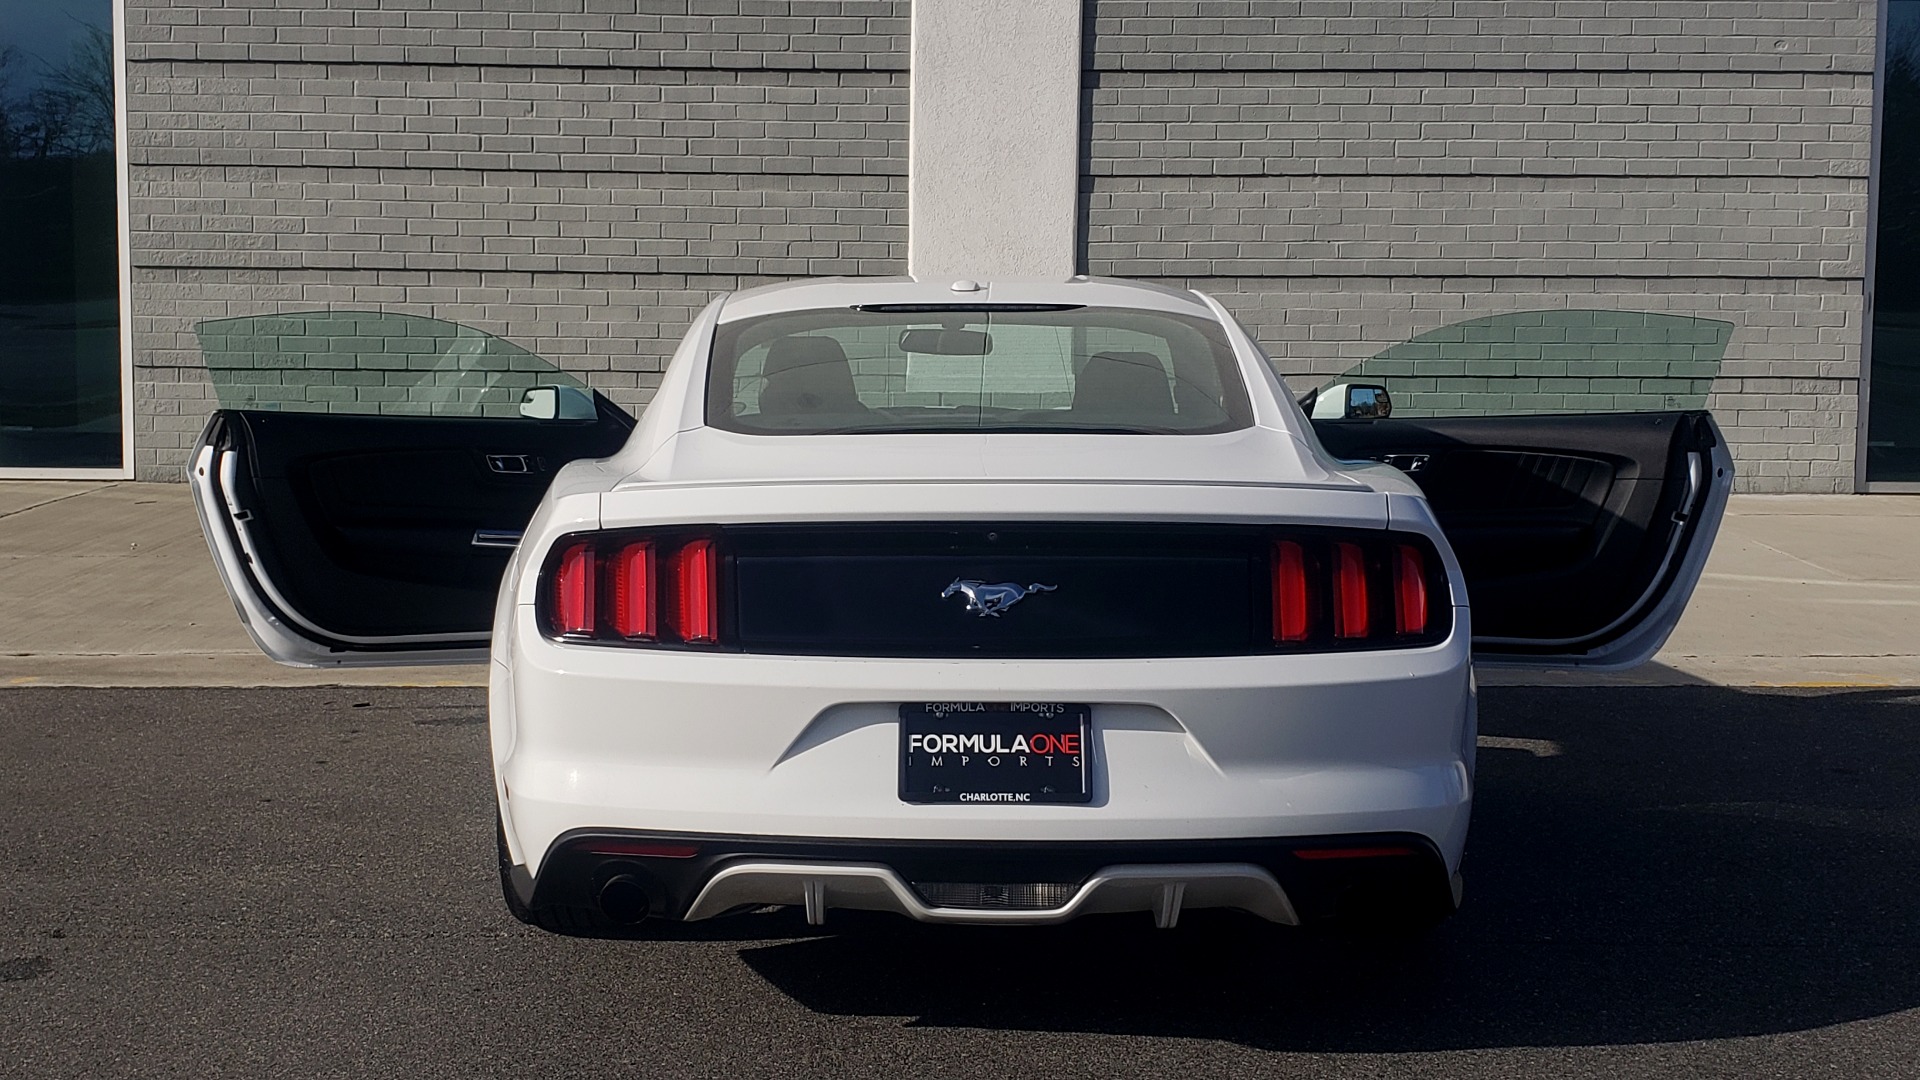 Used 2017 Ford MUSTANG PREMIUM COUPE 2.3L ECOBOOST / AUTO / 18-IN WHEELS / REARVIEW for sale Sold at Formula Imports in Charlotte NC 28227 25